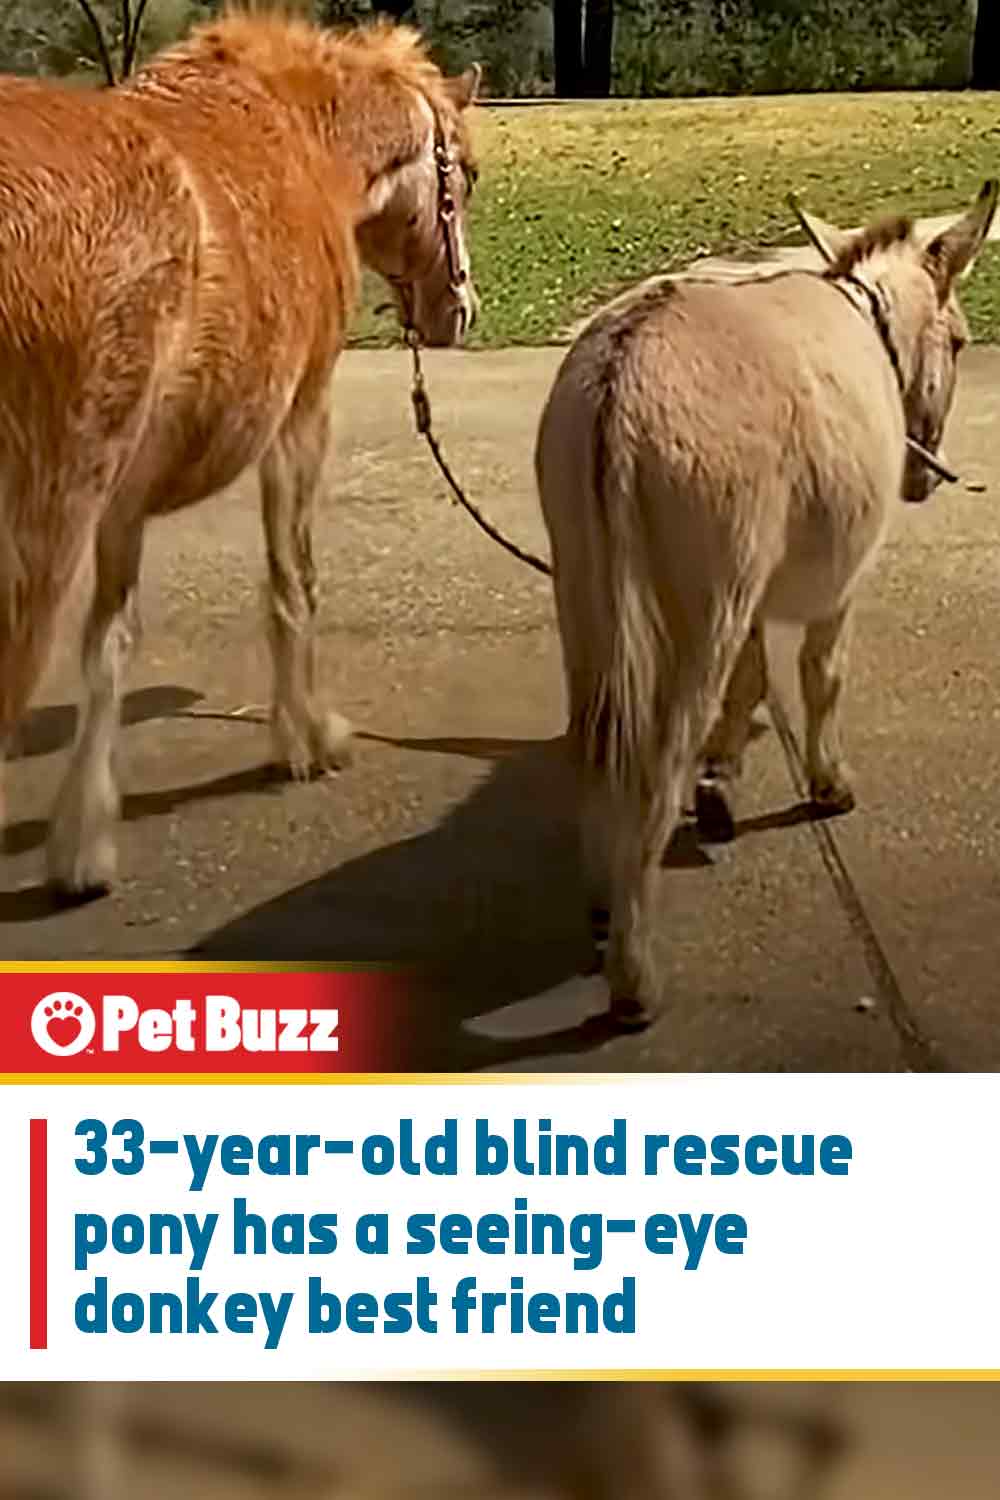 33-year-old blind rescue pony has a seeing-eye donkey best friend